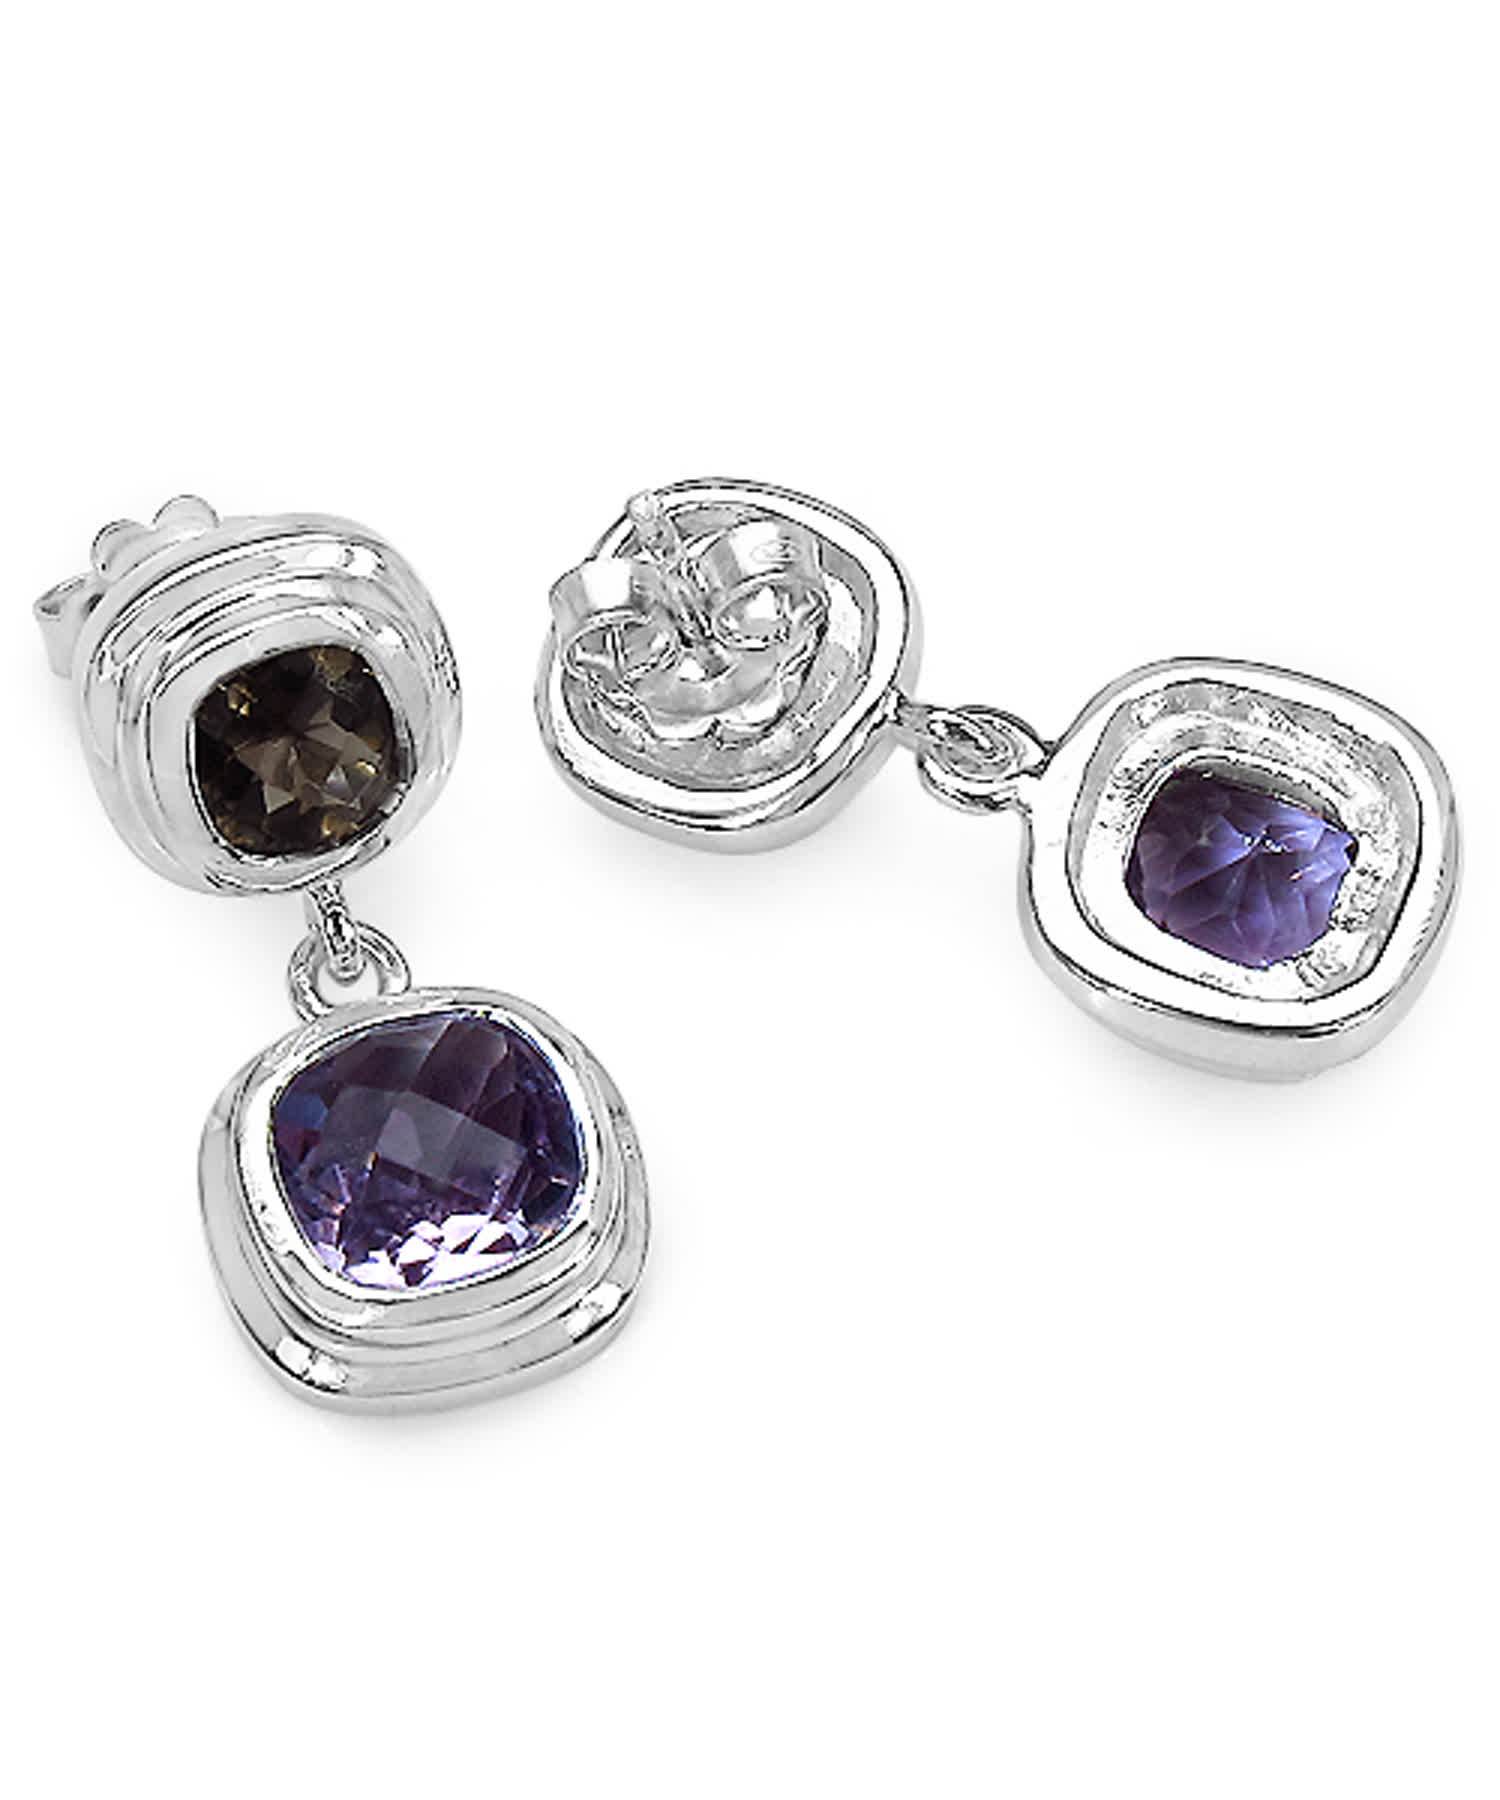 6.70ctw Natural Amethyst and Smoky Quartz Rhodium Plated 925 Sterling Silver Dangle Earrings View 2